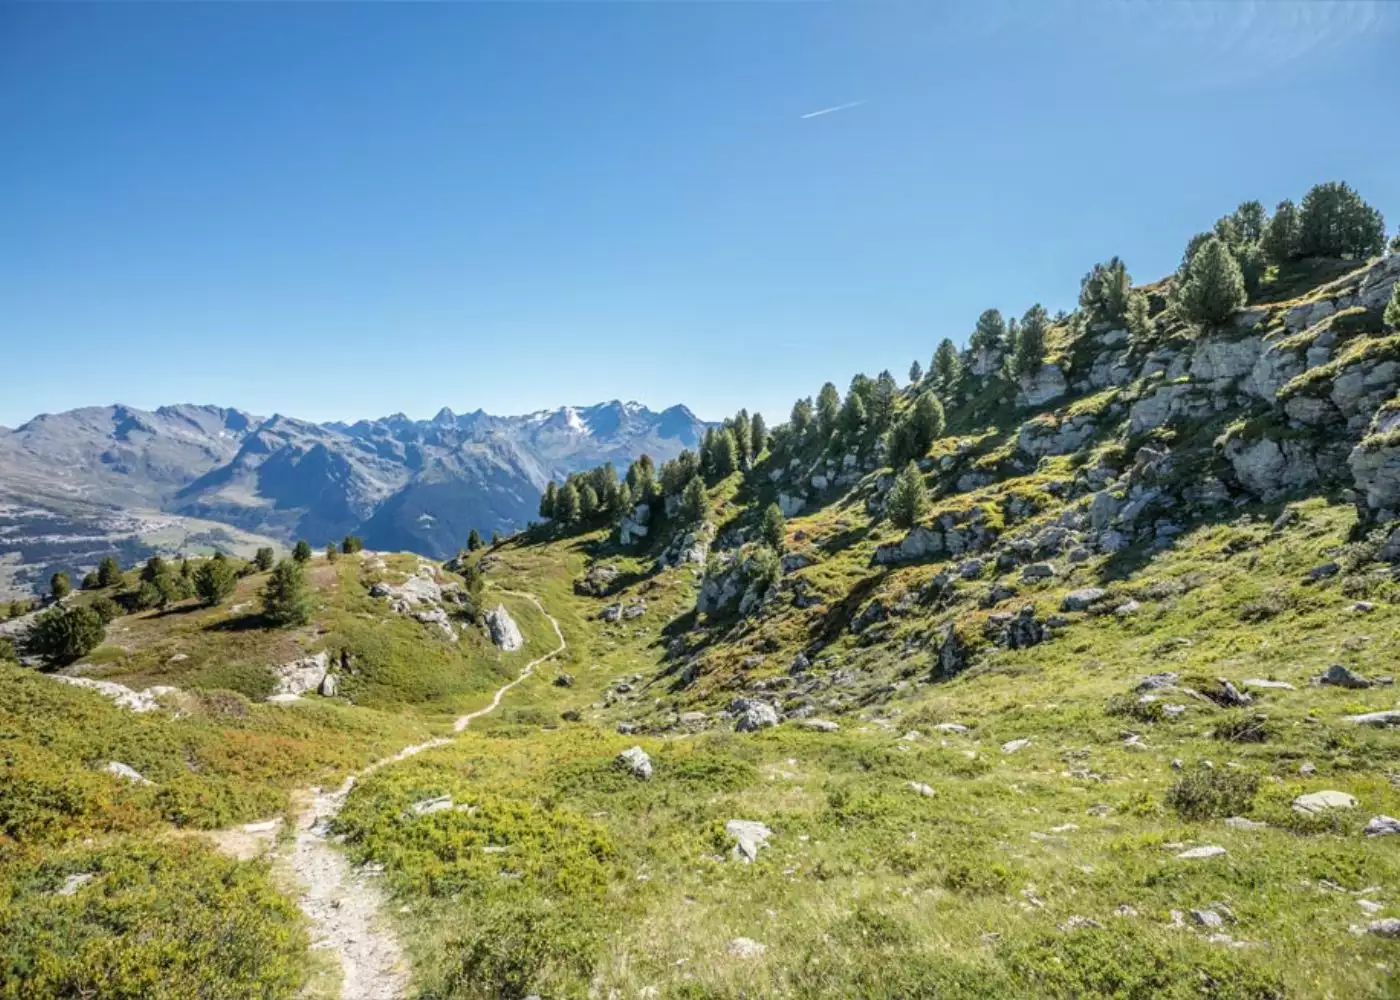 THE SPANISH PATH FROM ARC 1800 TO PEISEY VALLANDRY - A NICE FAMILY WALK